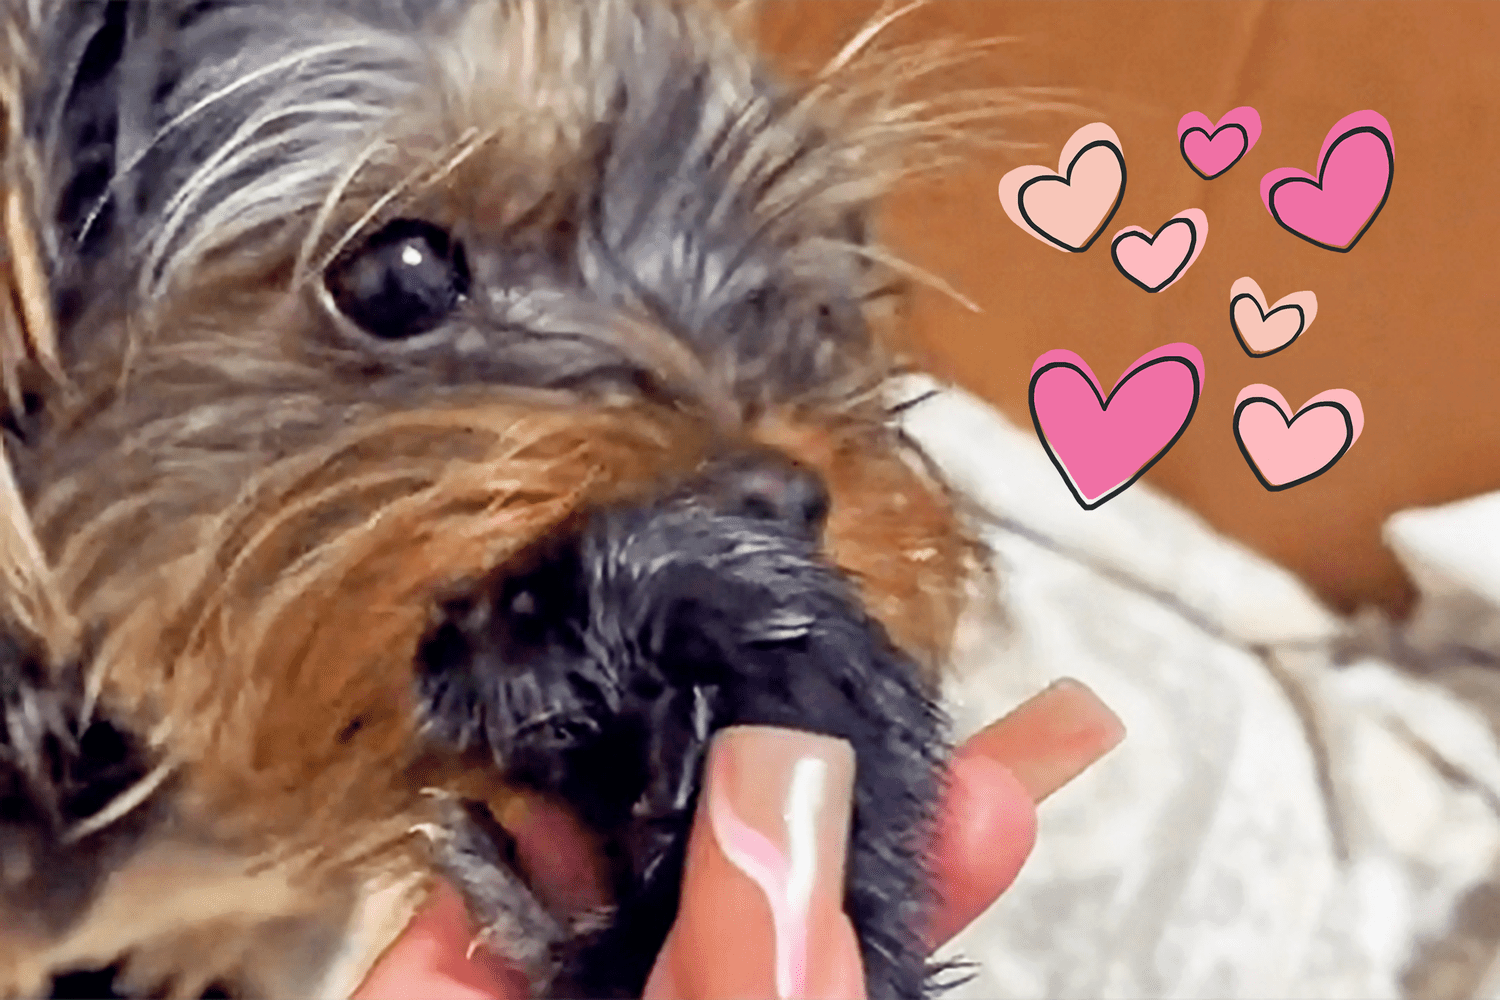 Yorkie kissing and licking kitten as if her own